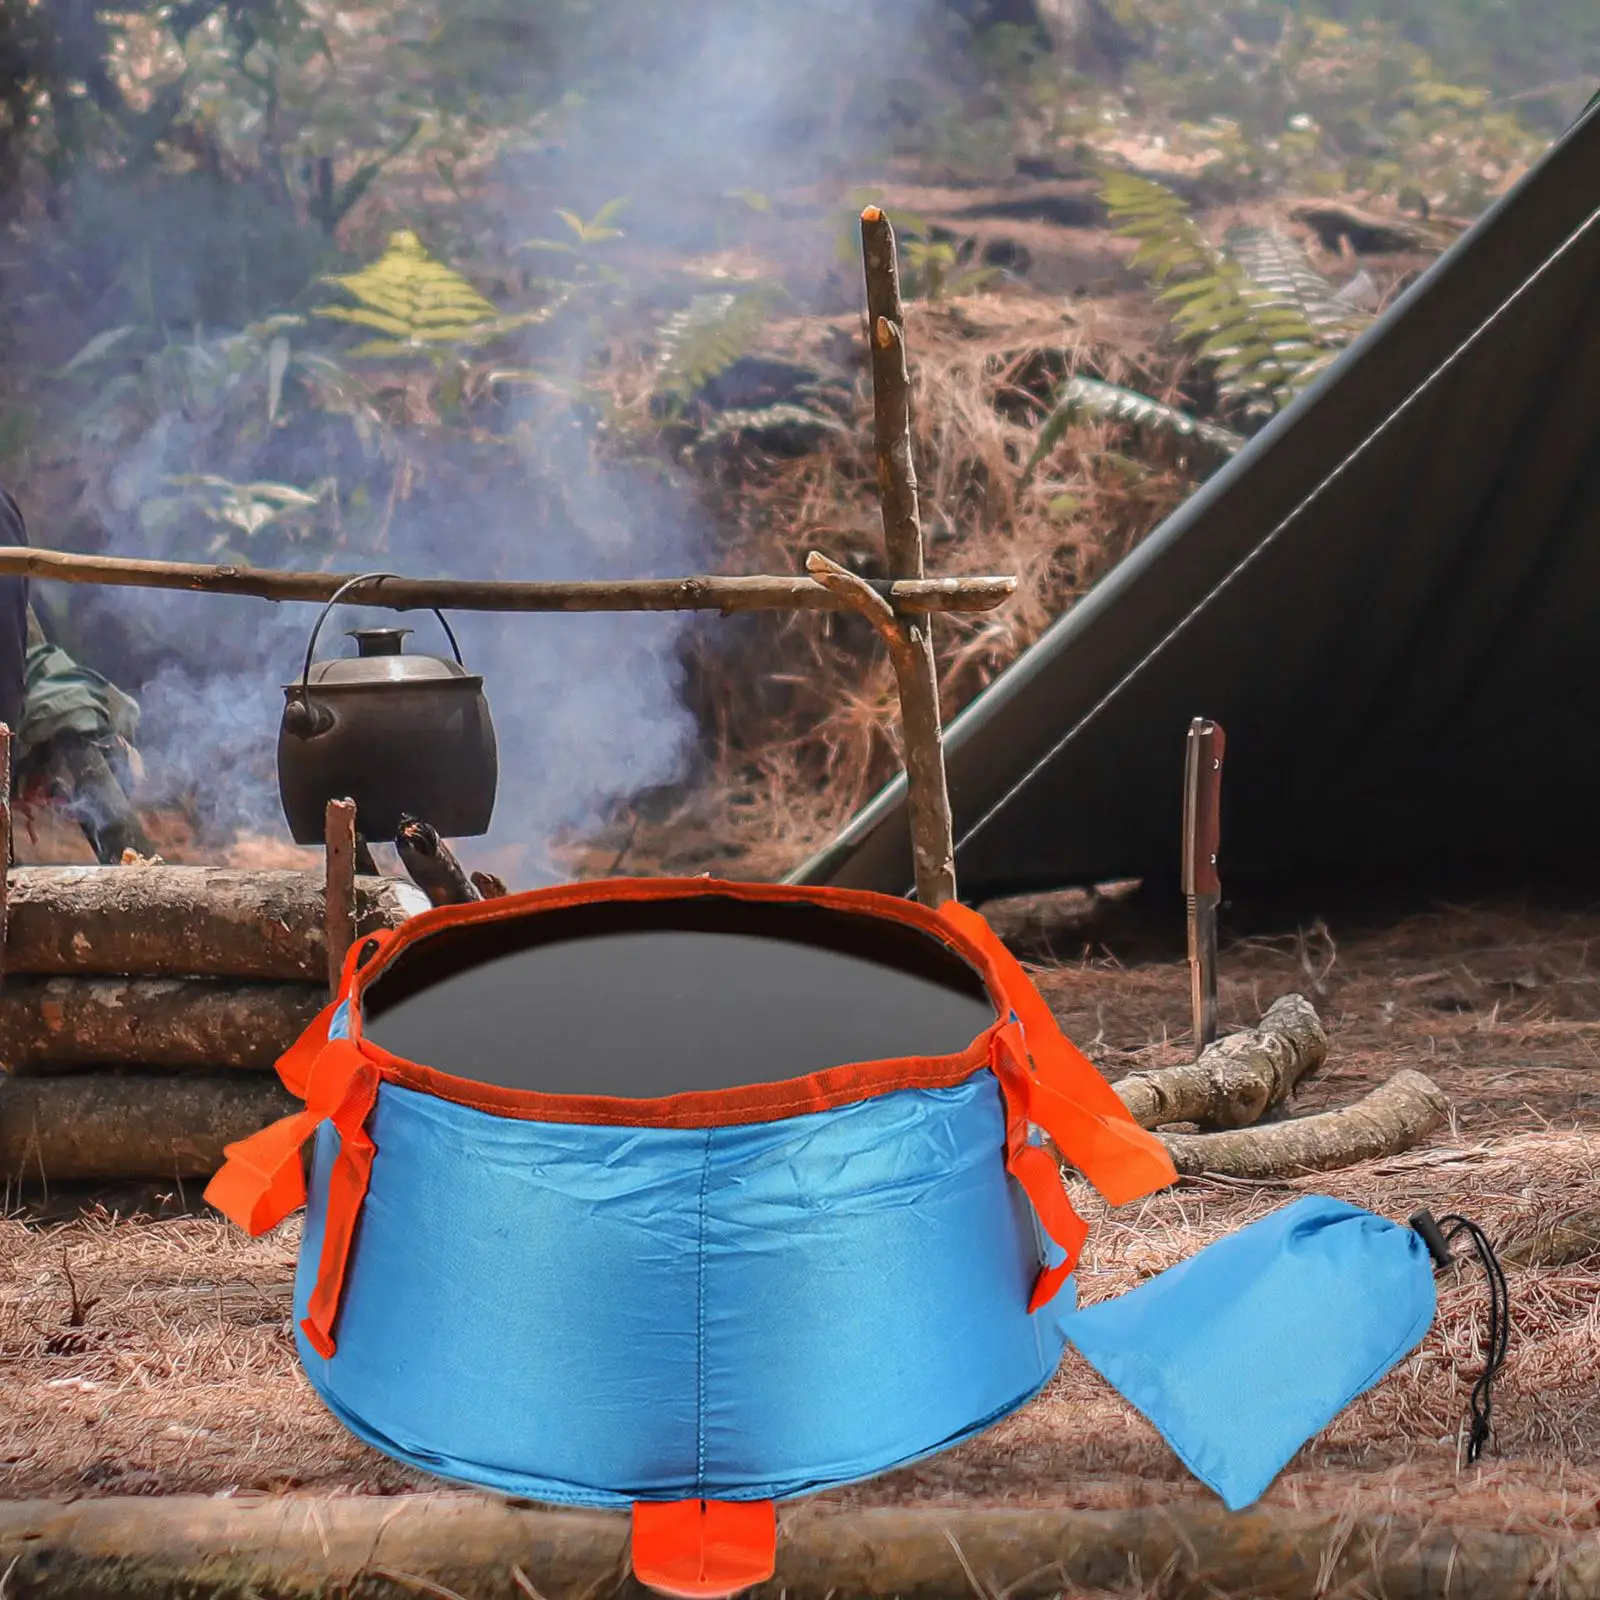 Portable Collapsible Bucket Foldable with Carry Bag Wash Basin Lightweight for Camping Car Washing Survival Hiking Outdoor